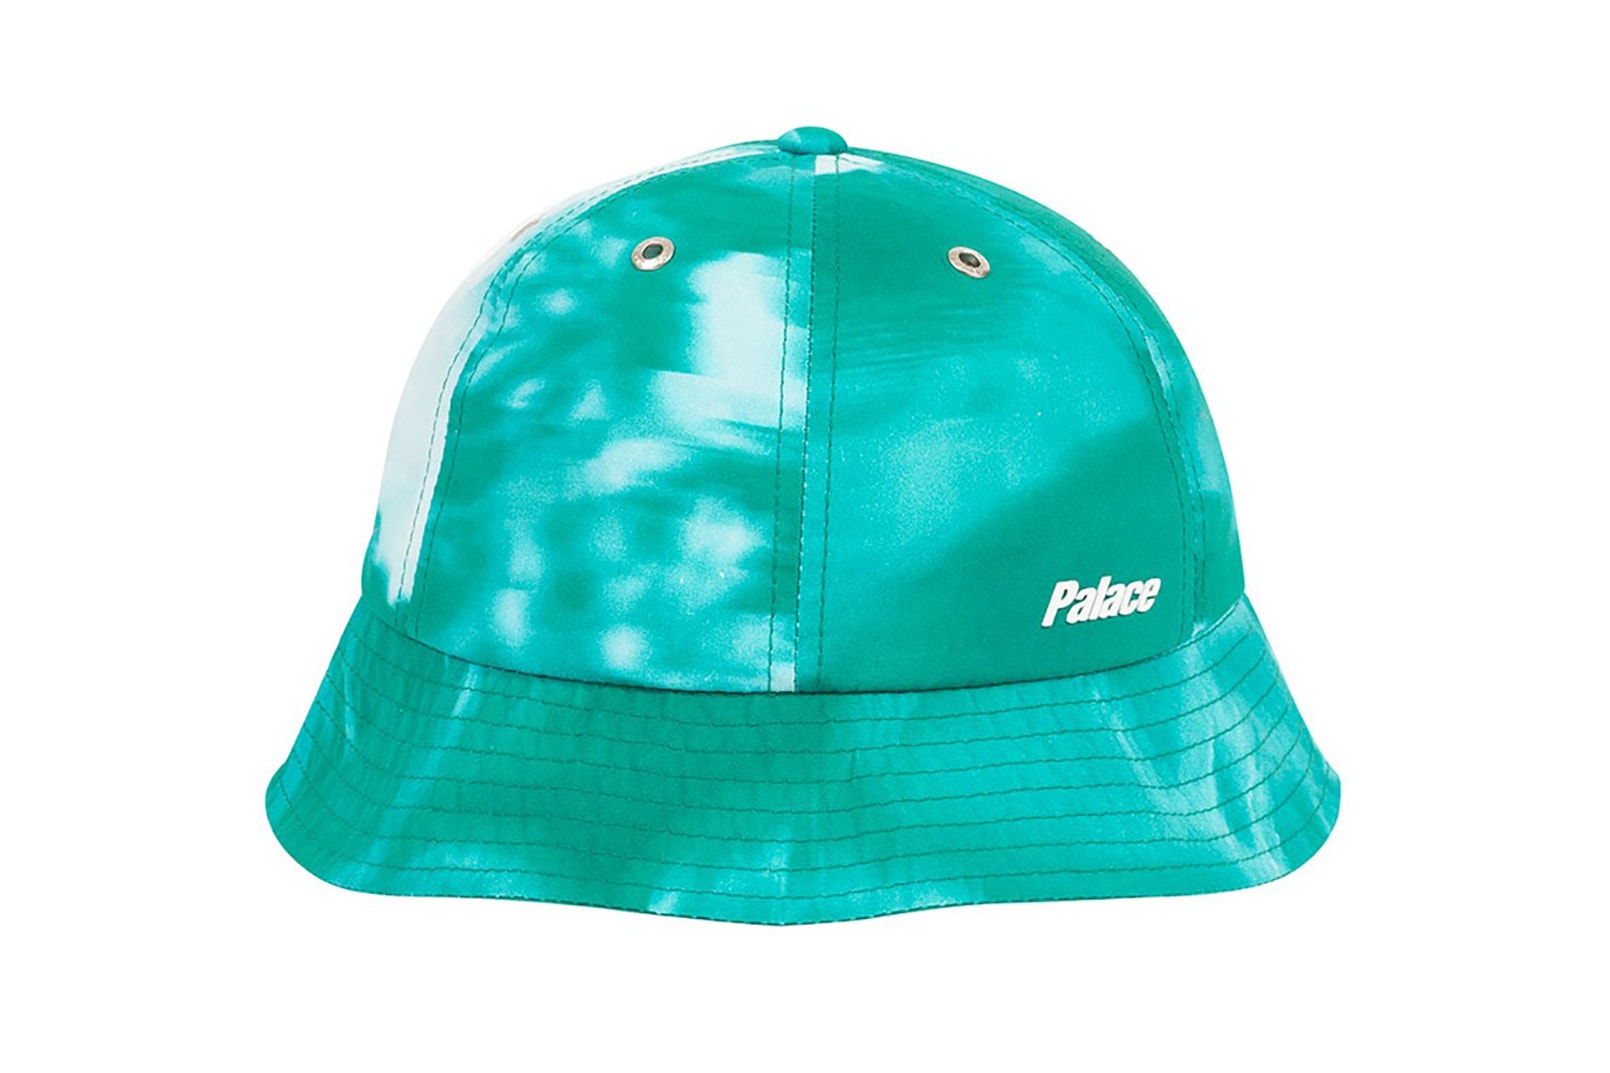 Palace Spring 2019 Bucket Hat Teal Green